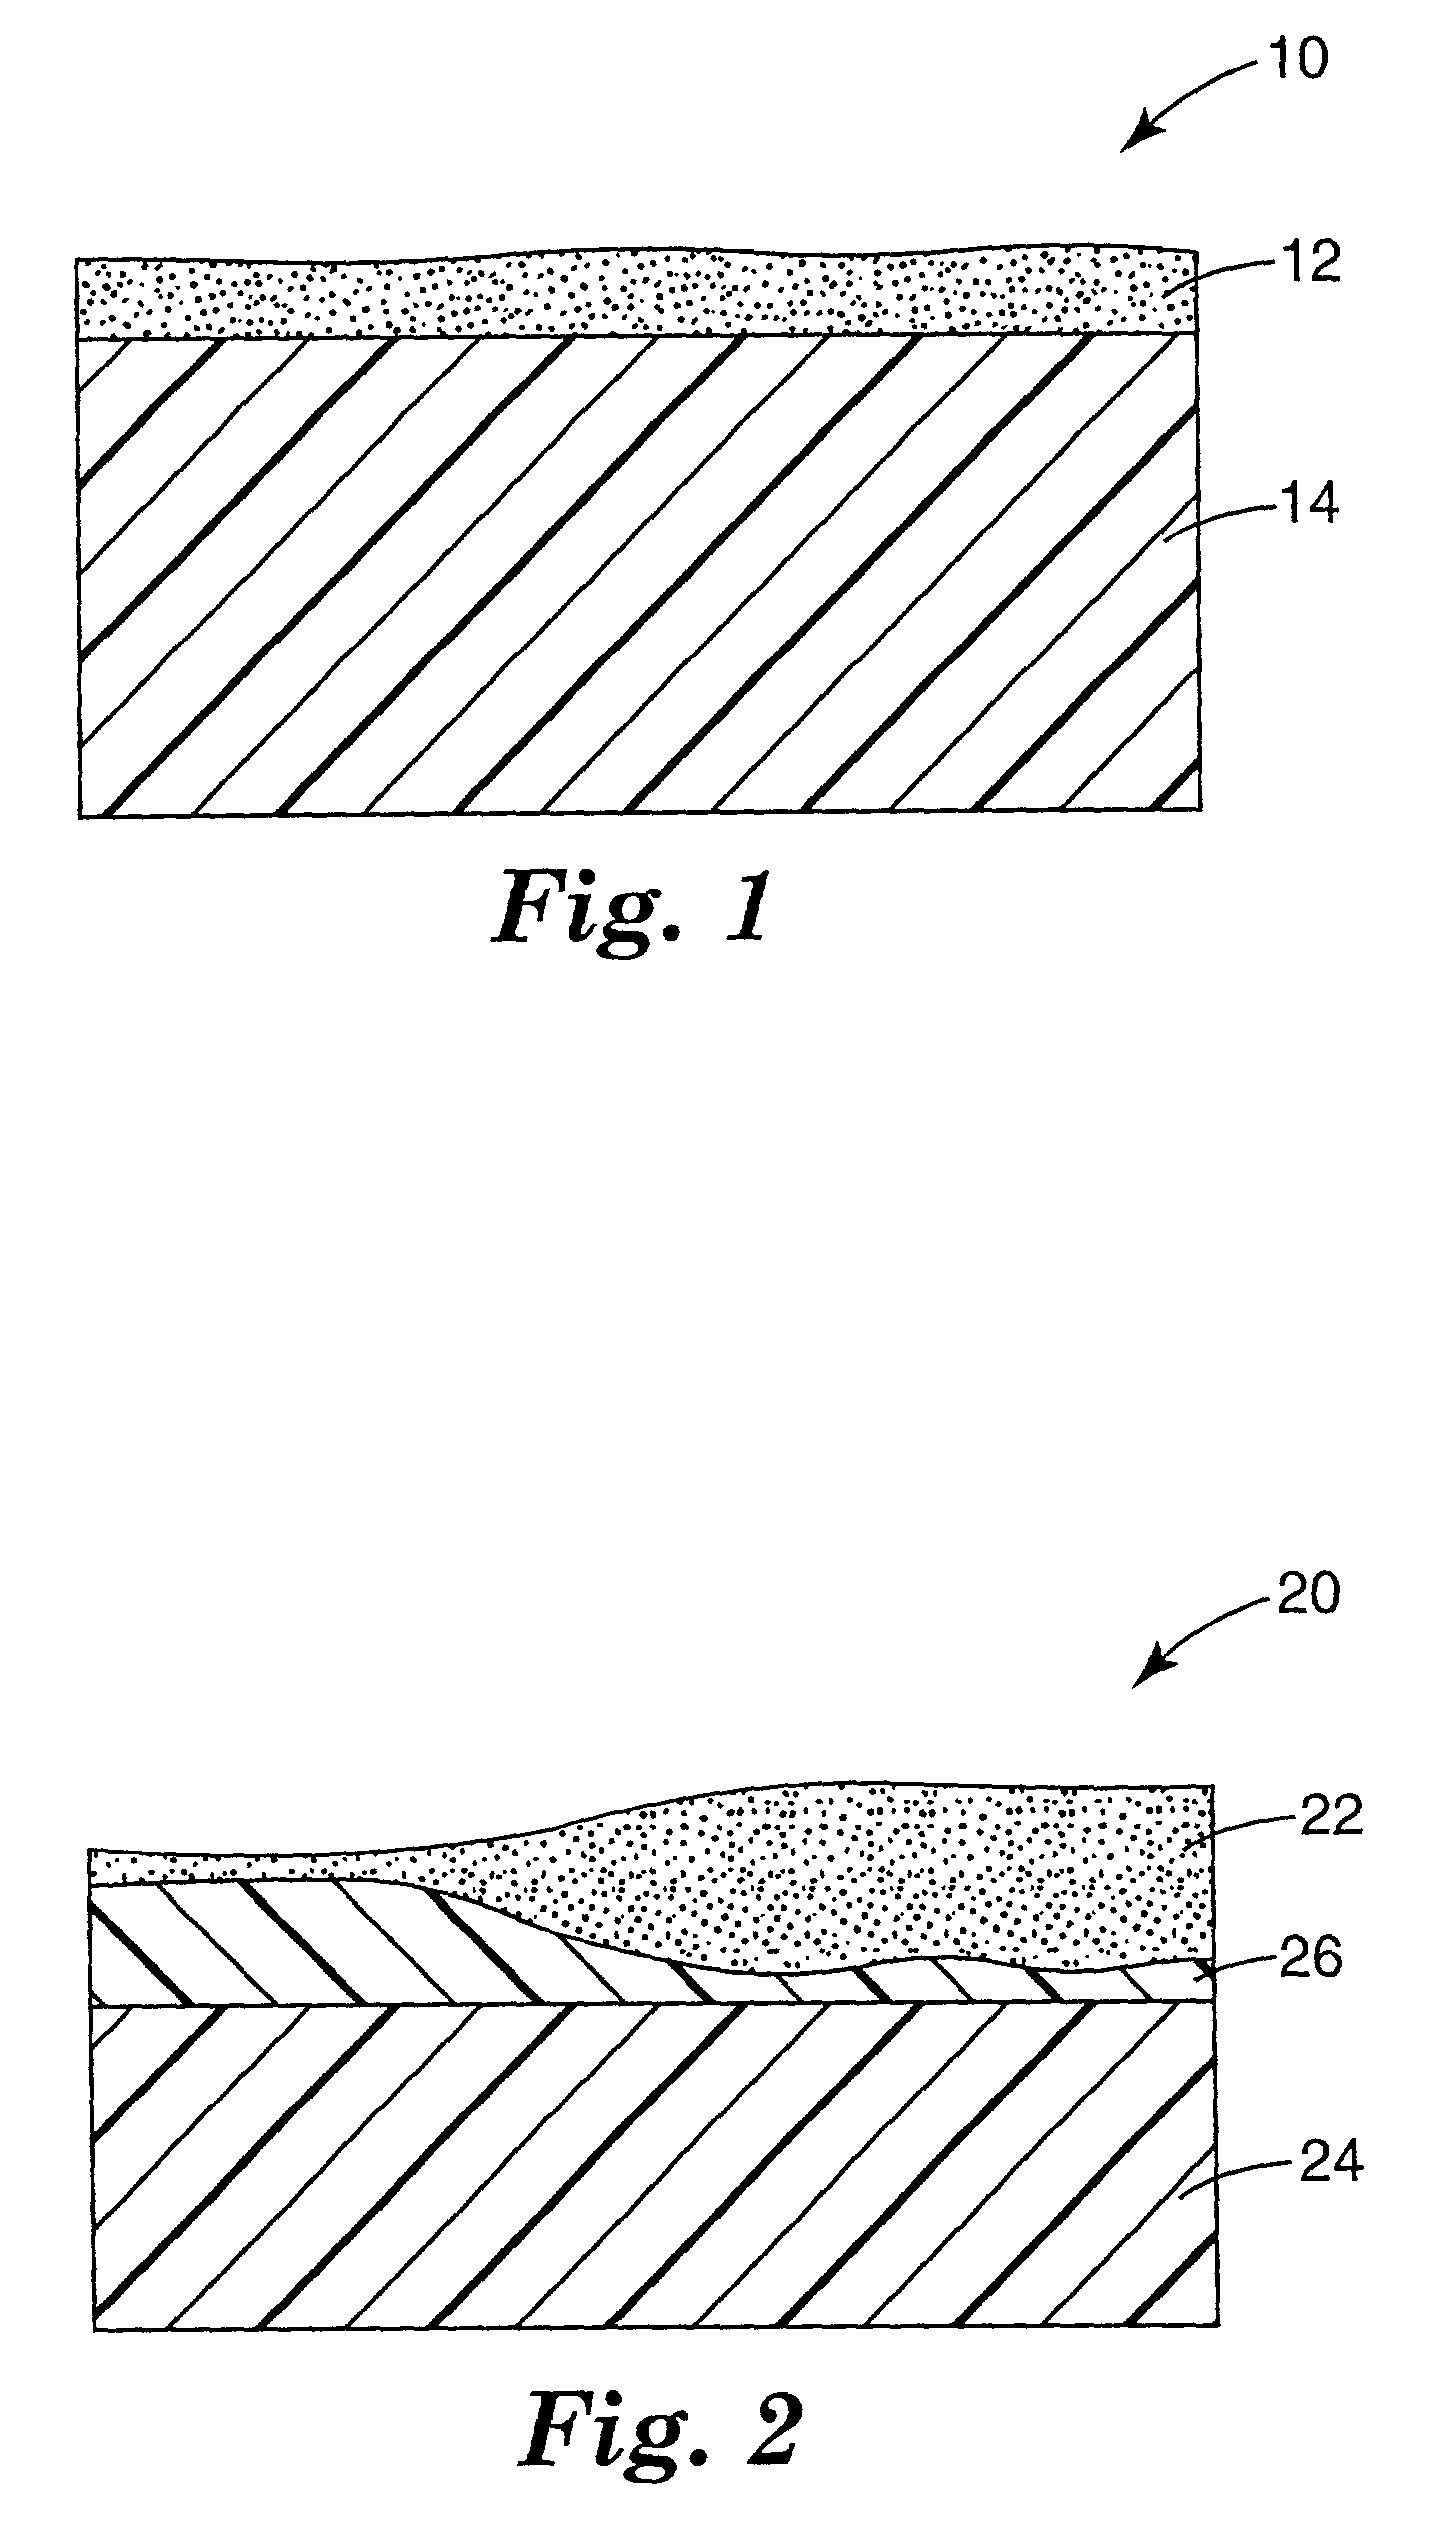 Imaged articles comprising a substrate having a primed surface